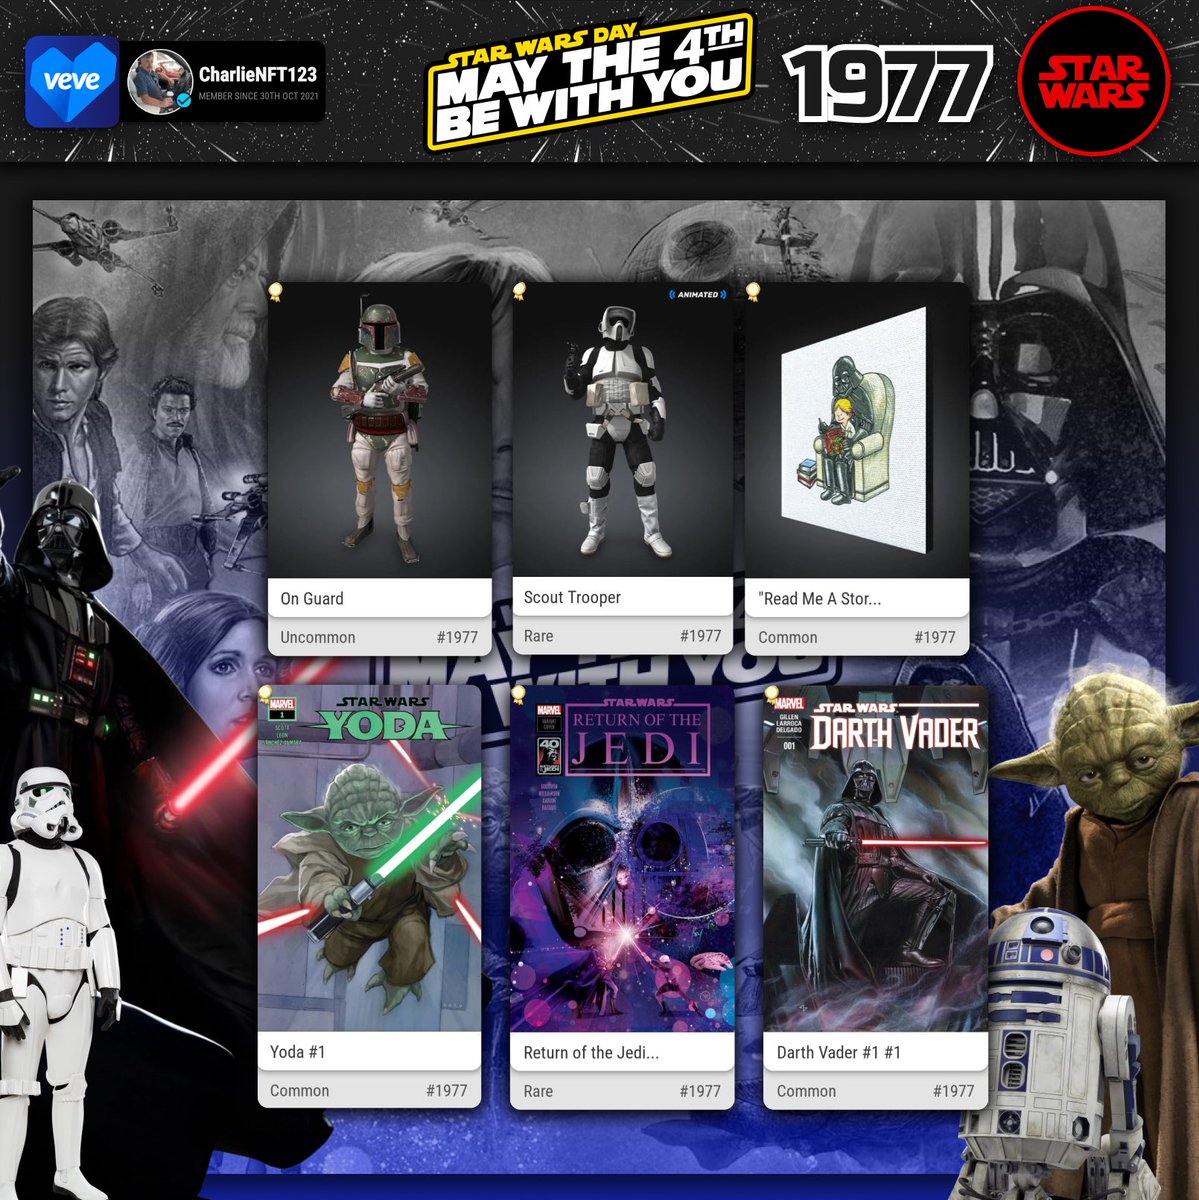 May The Fourth Be With You 1977 was the beginning of... #StarWarsDay #MayThe4thBeWithYou #DigitalCollectibles @veve_official @starwars #CollectorsAtHeart 💙 #veve #vevefam